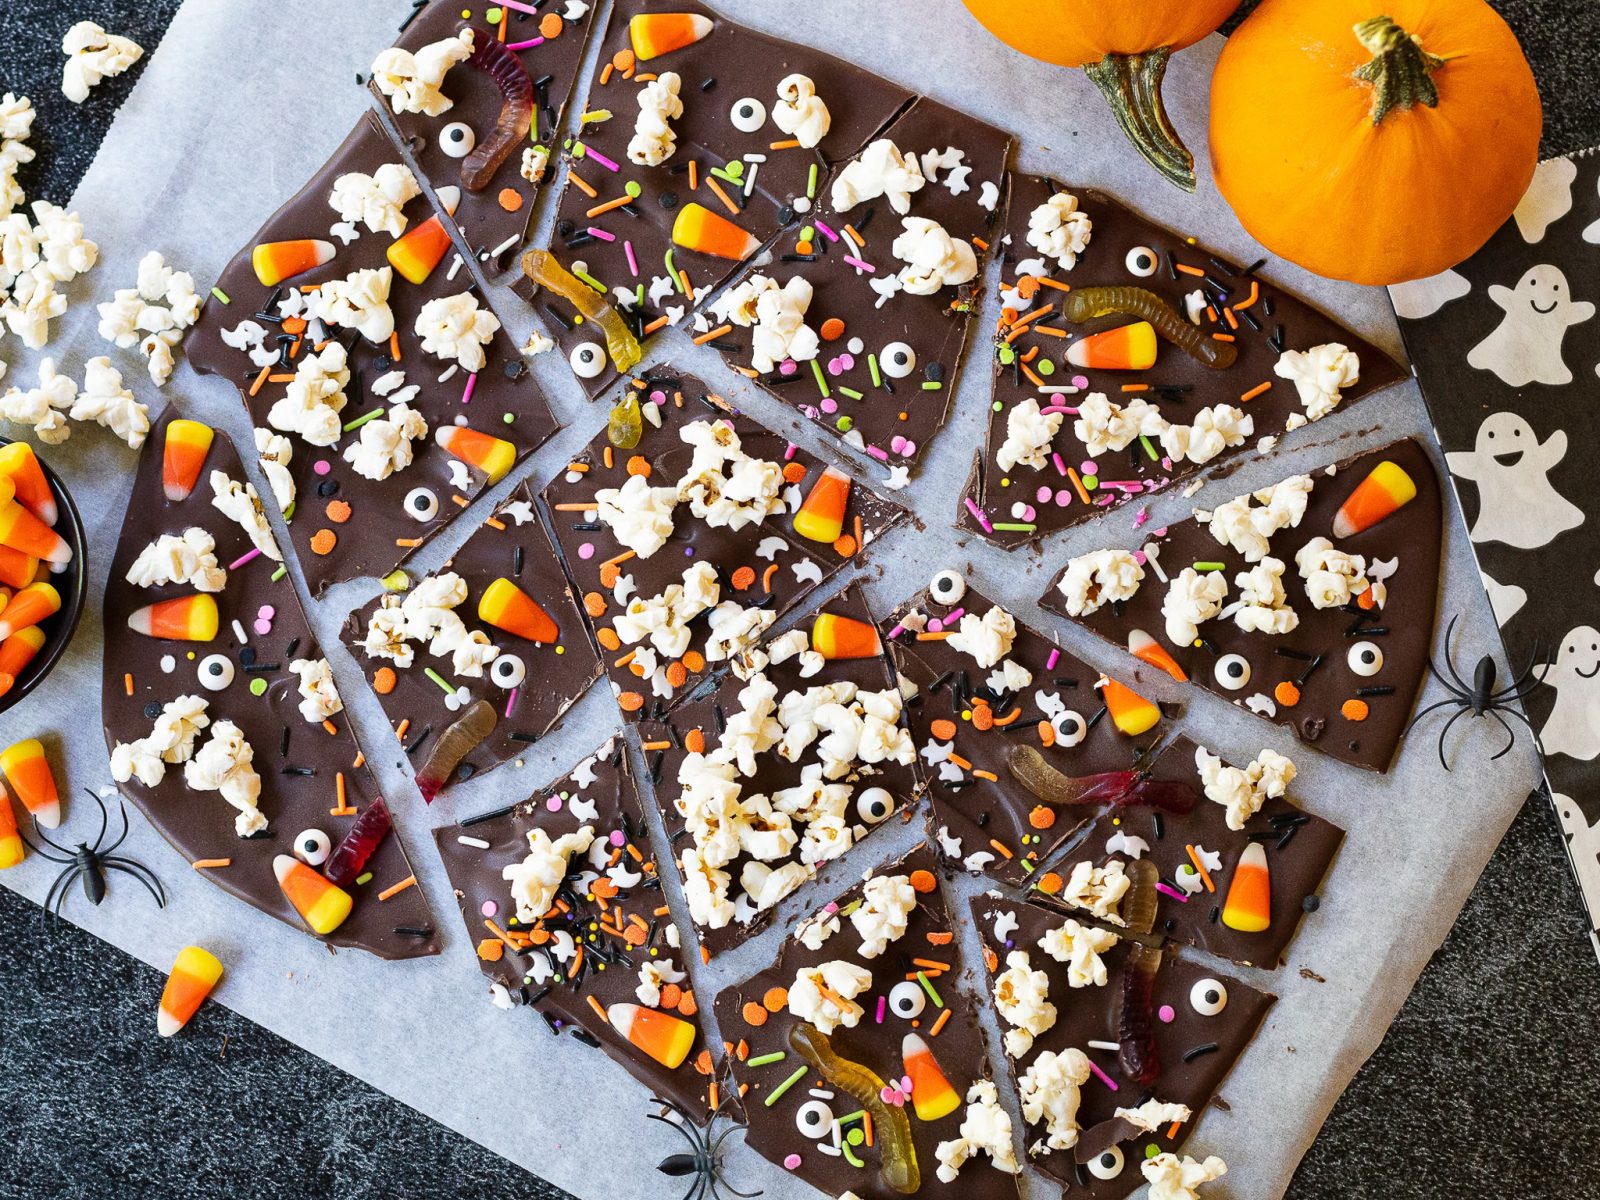 Halloween Monster Popcorn Bark With JOLLY TIME Pop Corn Is A Quick & Tasty Treat The Whole Family Will Love